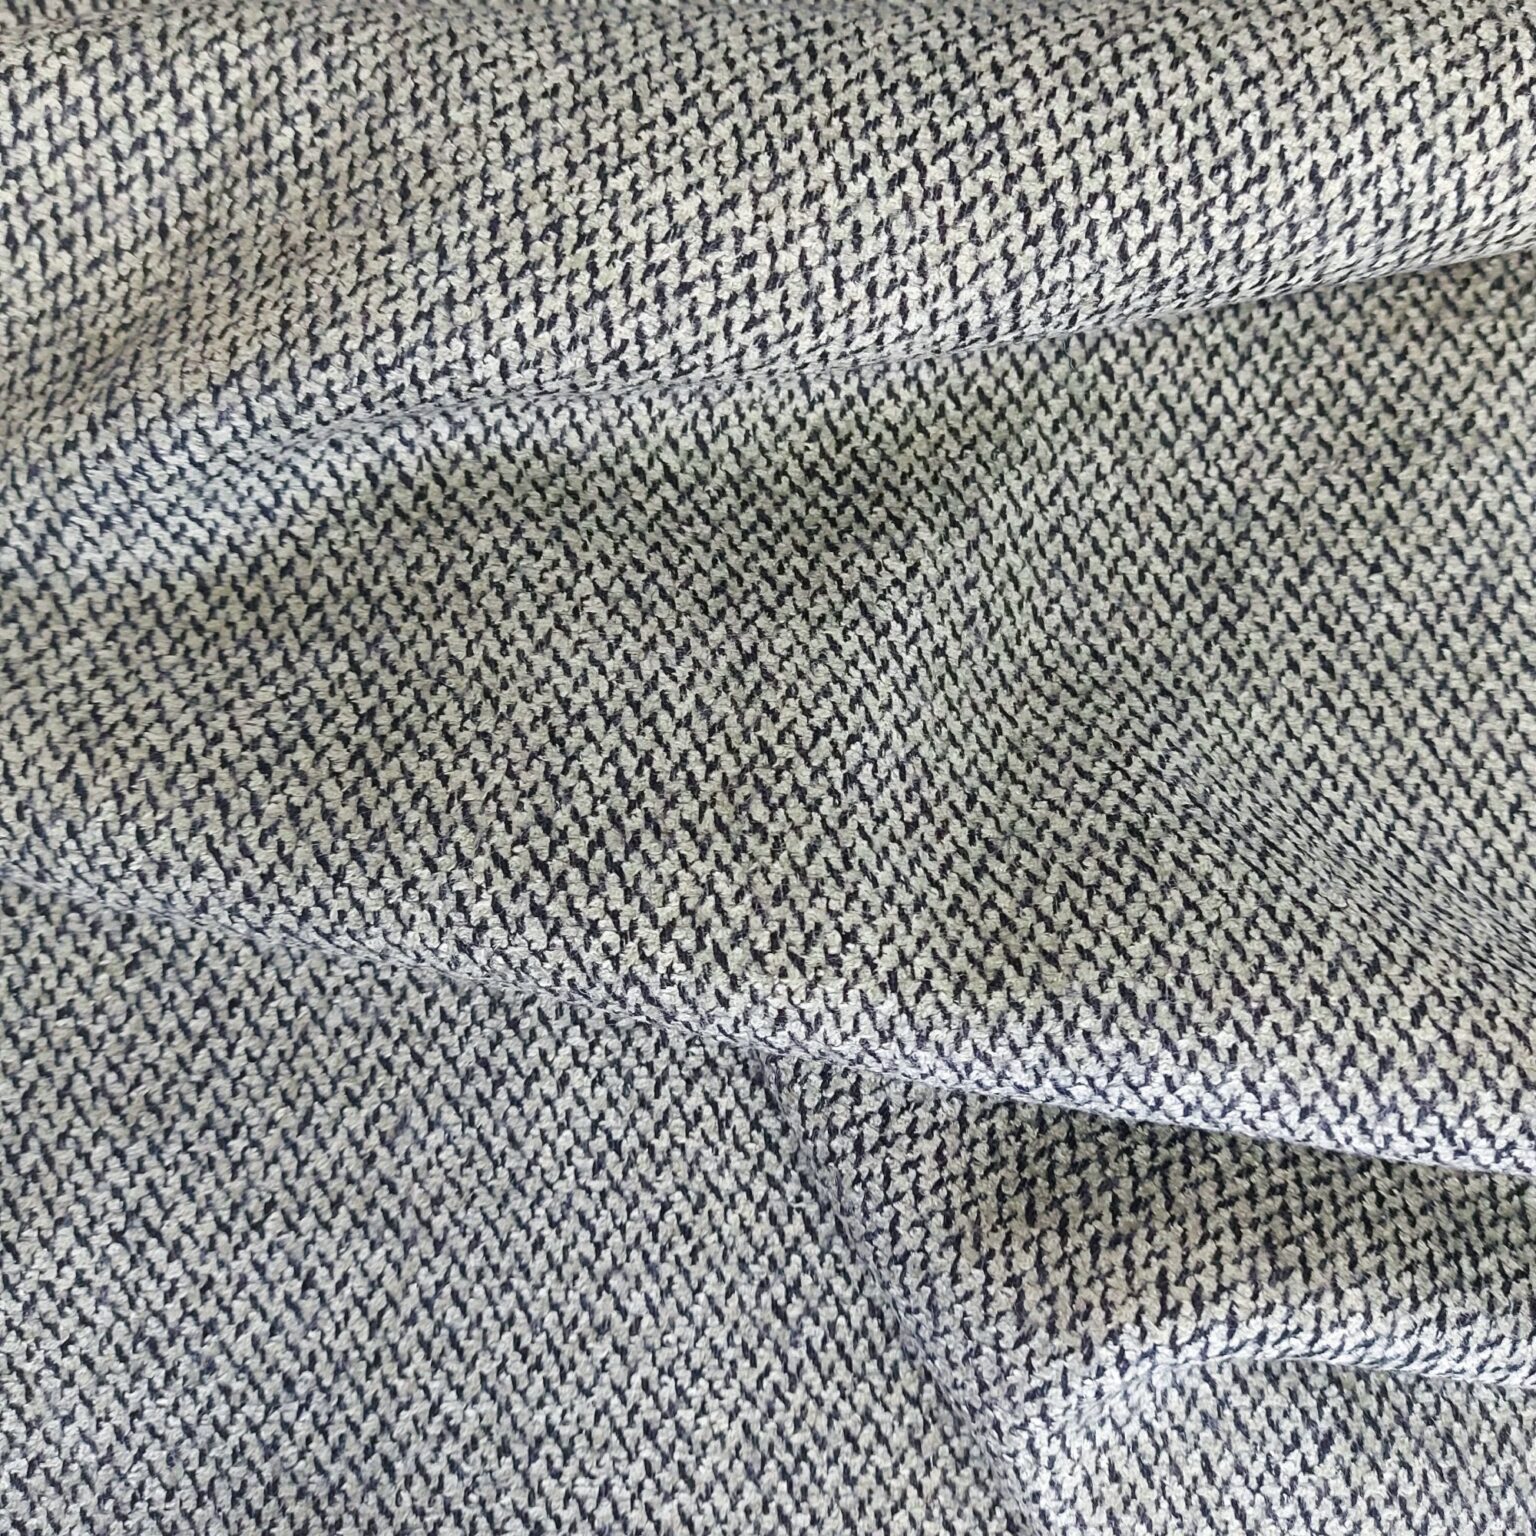 Buy Chenille Tweed Check Coating Fabric at More Sewing